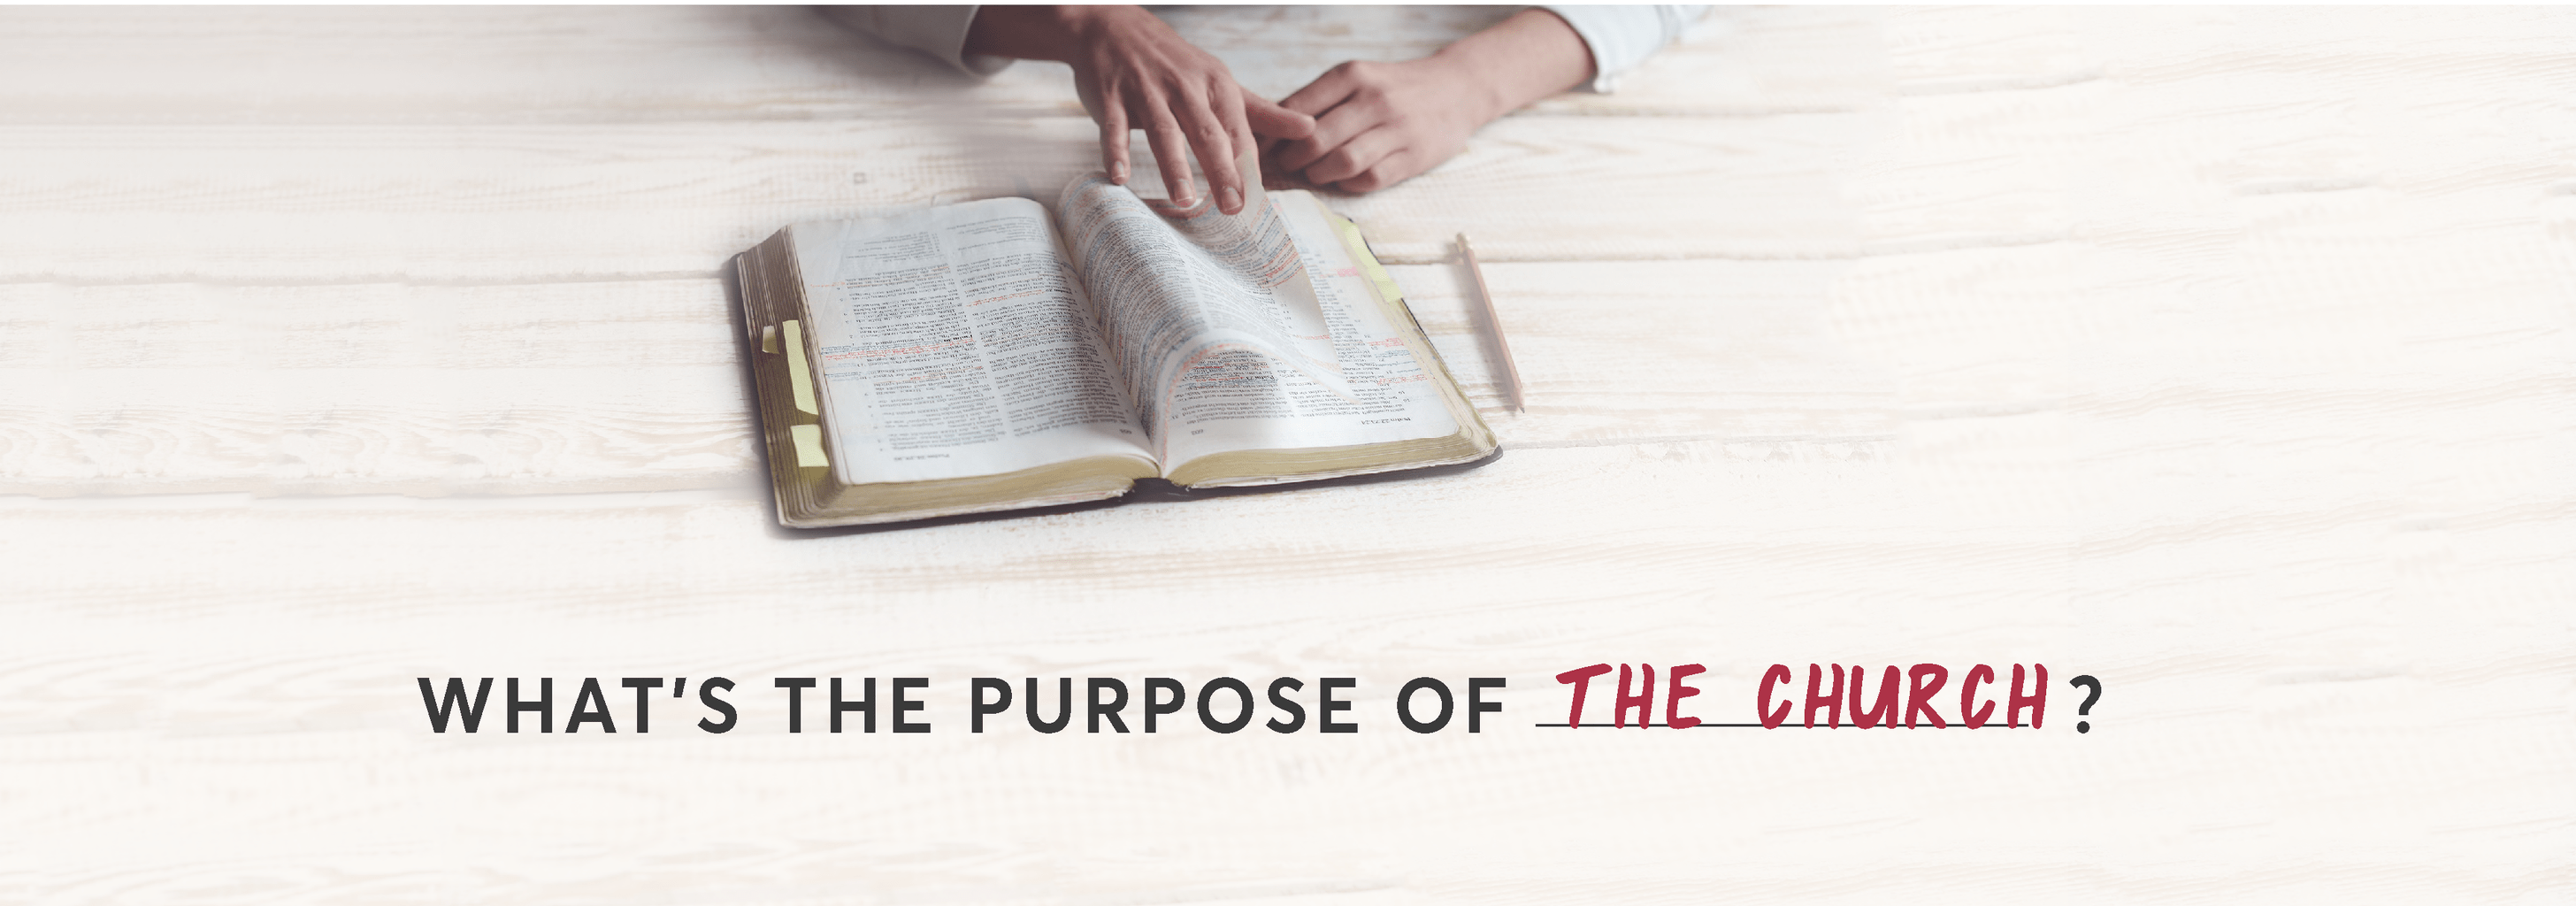 What is the purpose of the church